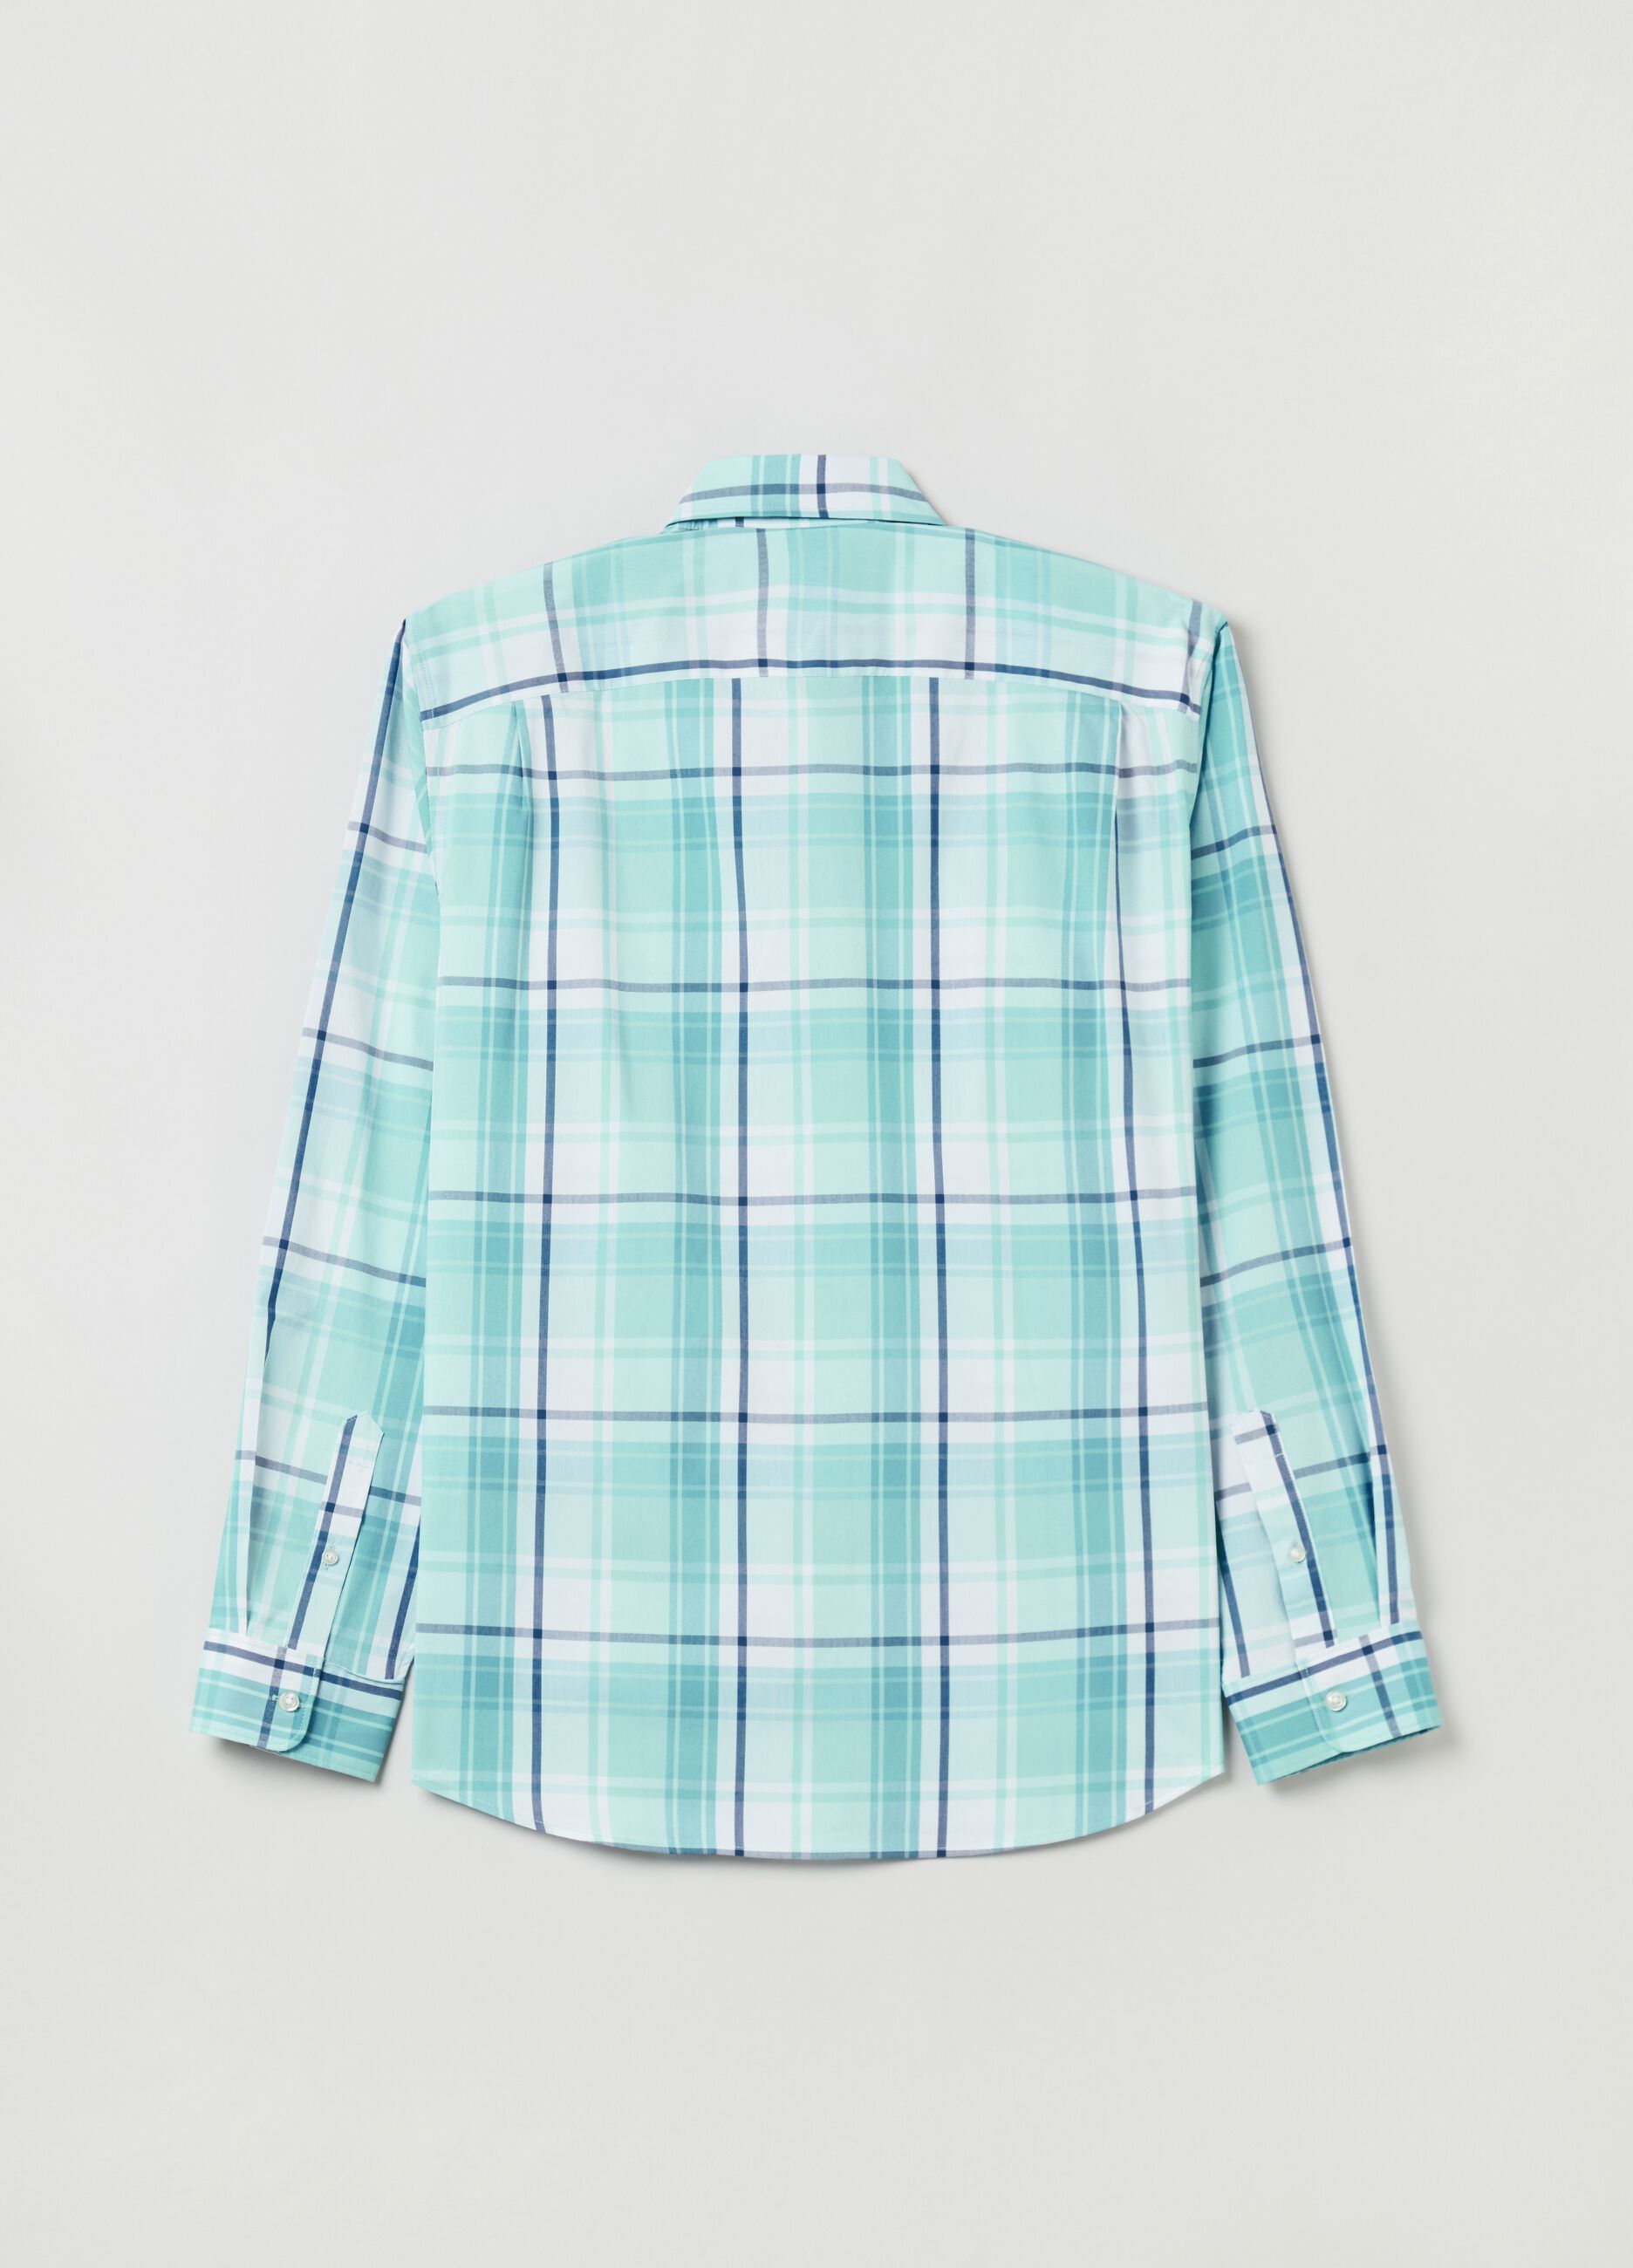 Coolmax® fabric patterned shirt